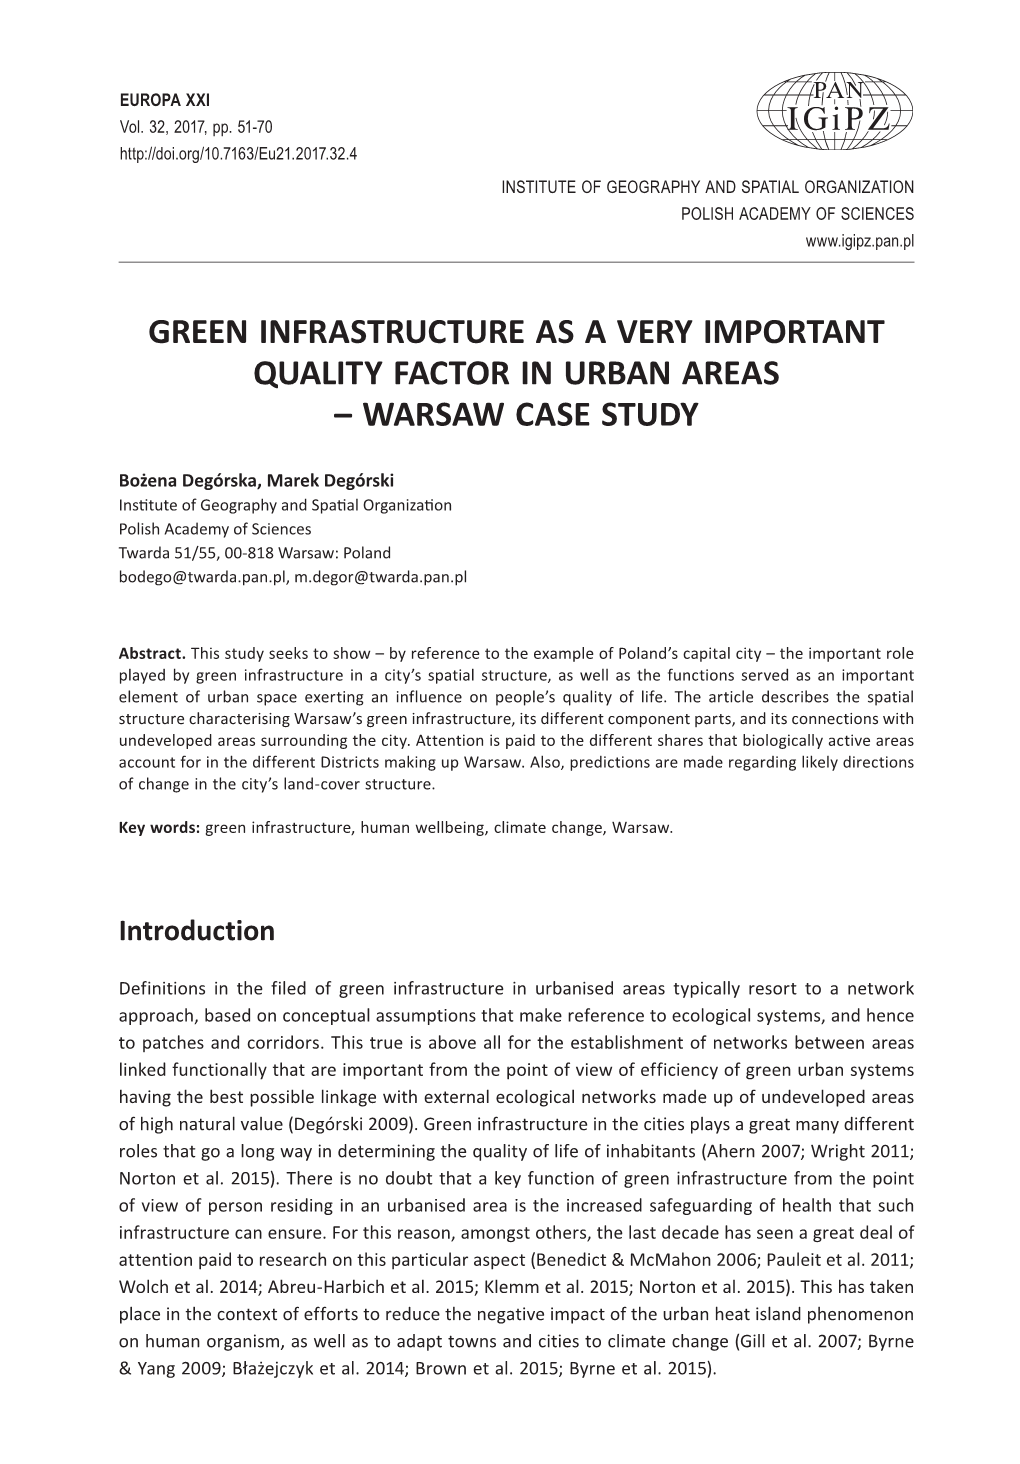 Europa XXI 32 (2017), Green Infrastructure As a Very Important Quality Factor in Urban Areas – Warsaw Case Study